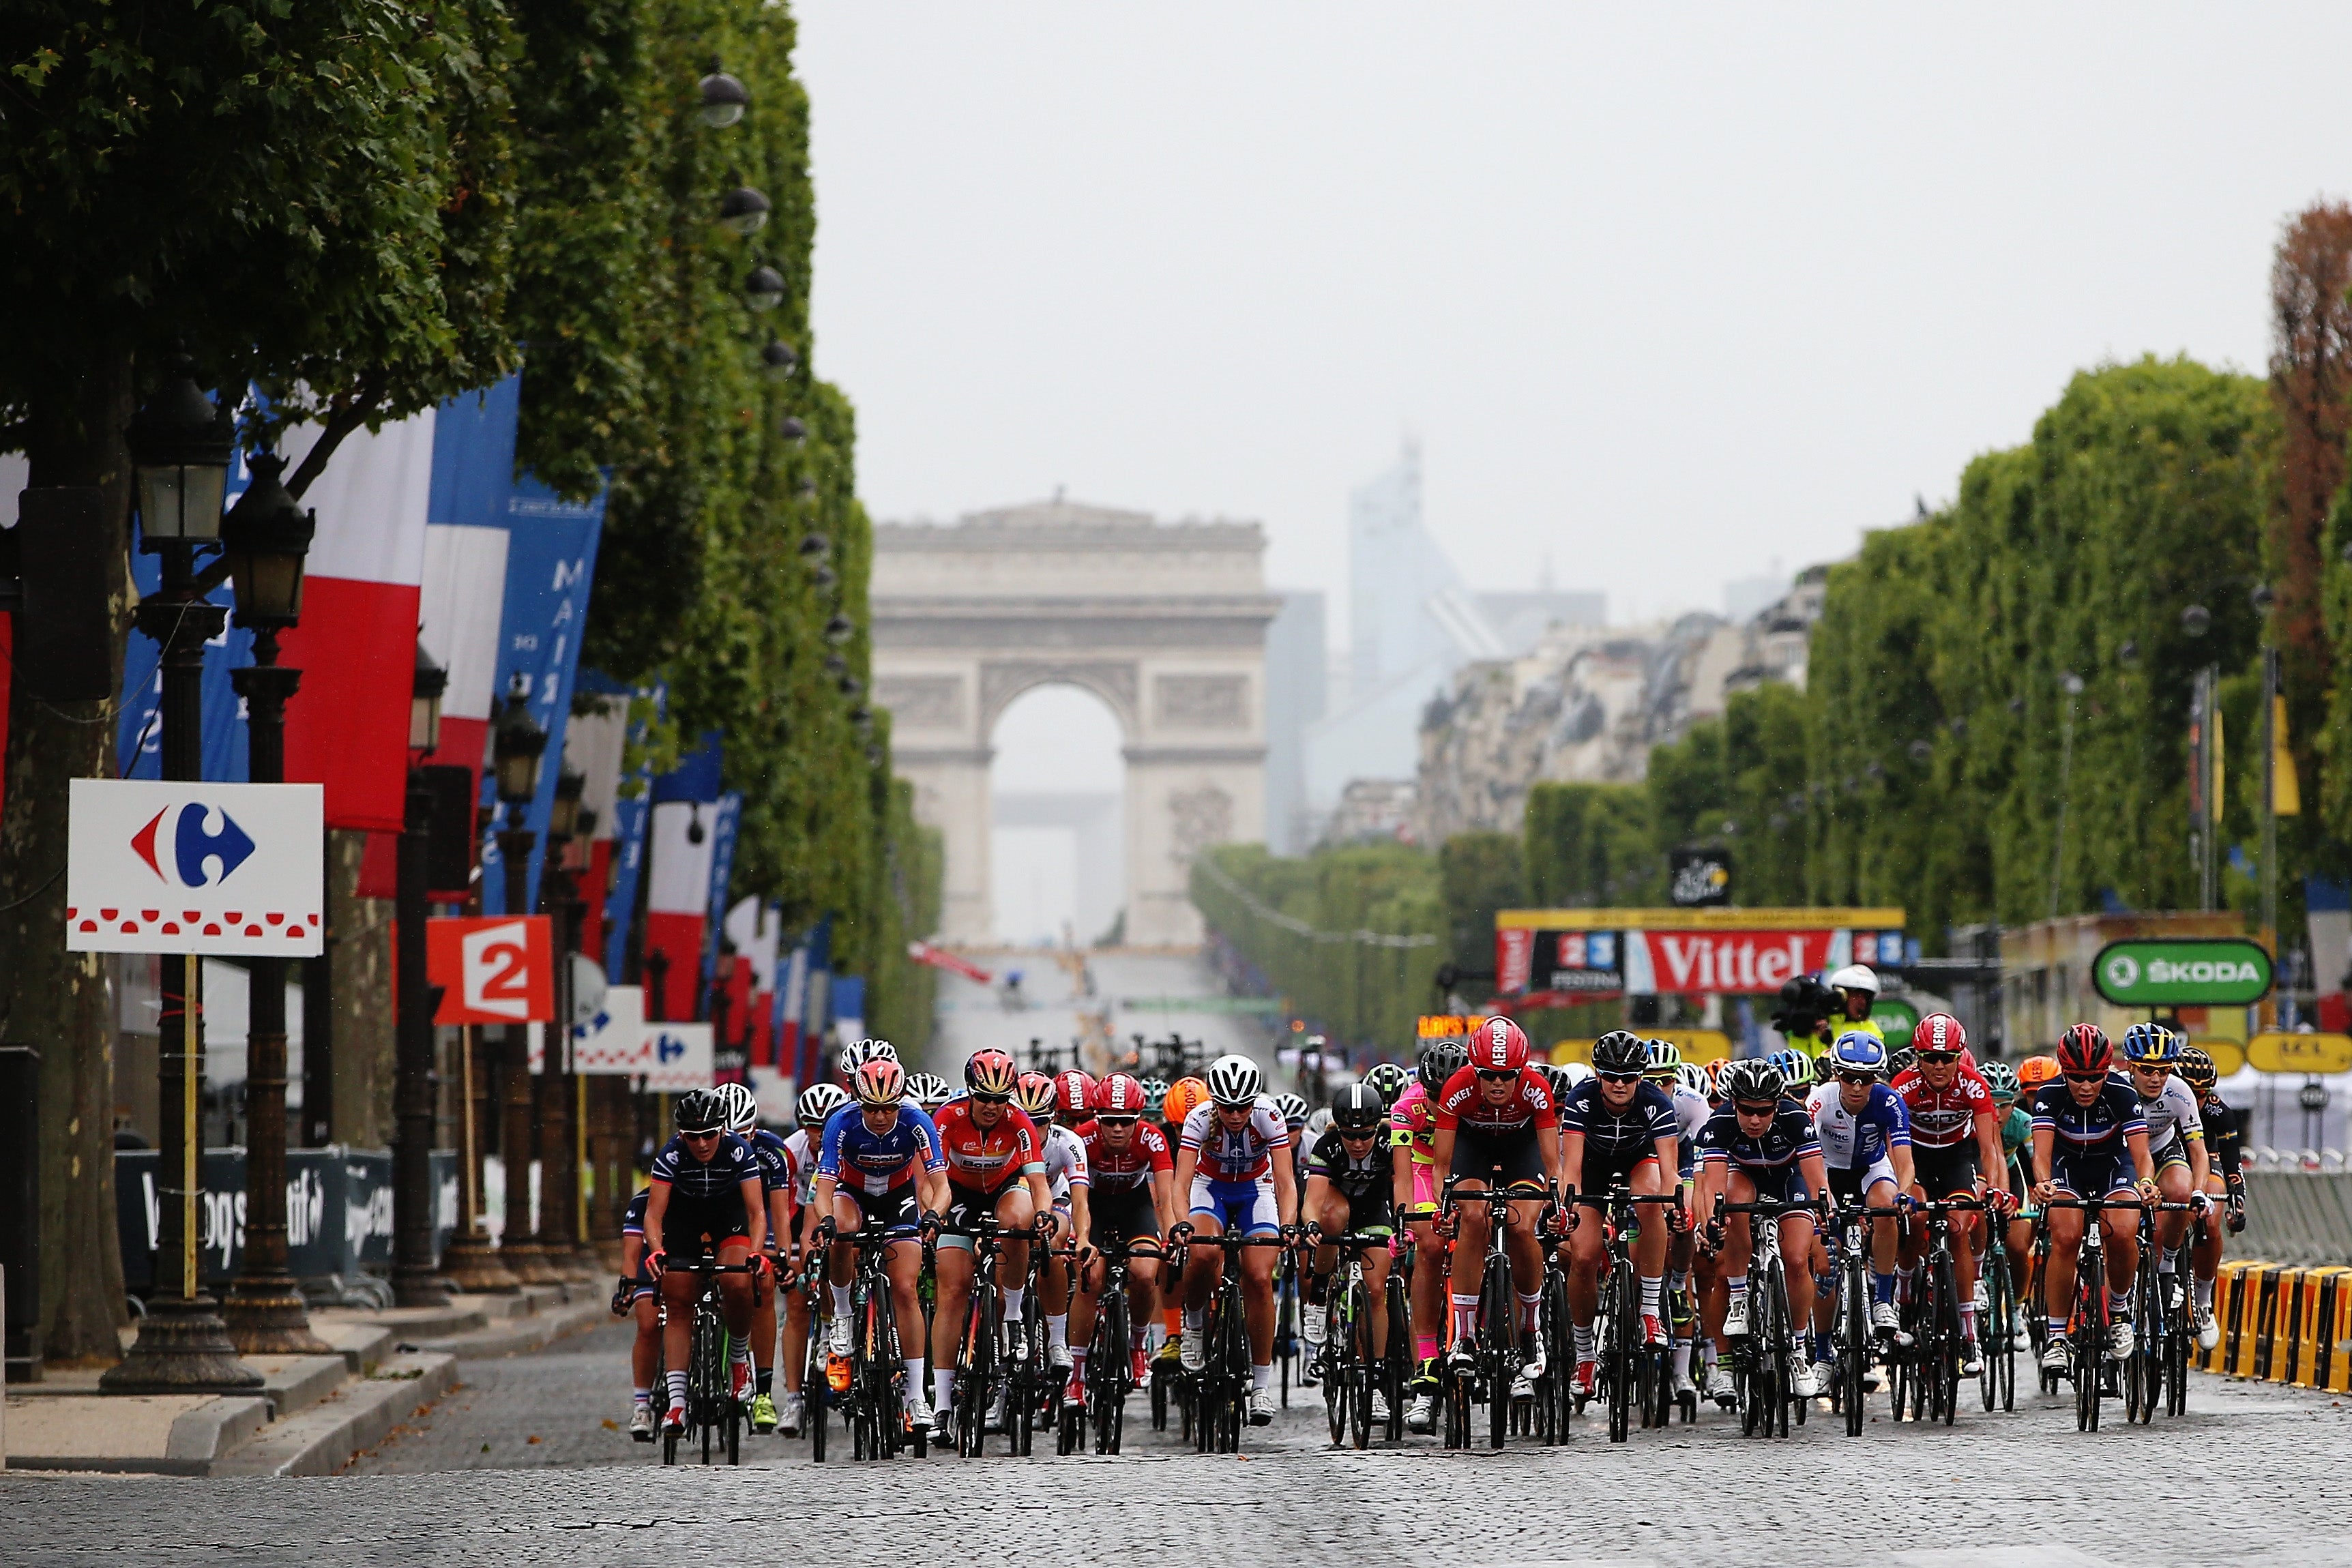 La Course riding up the Champs-Elysees in 2015